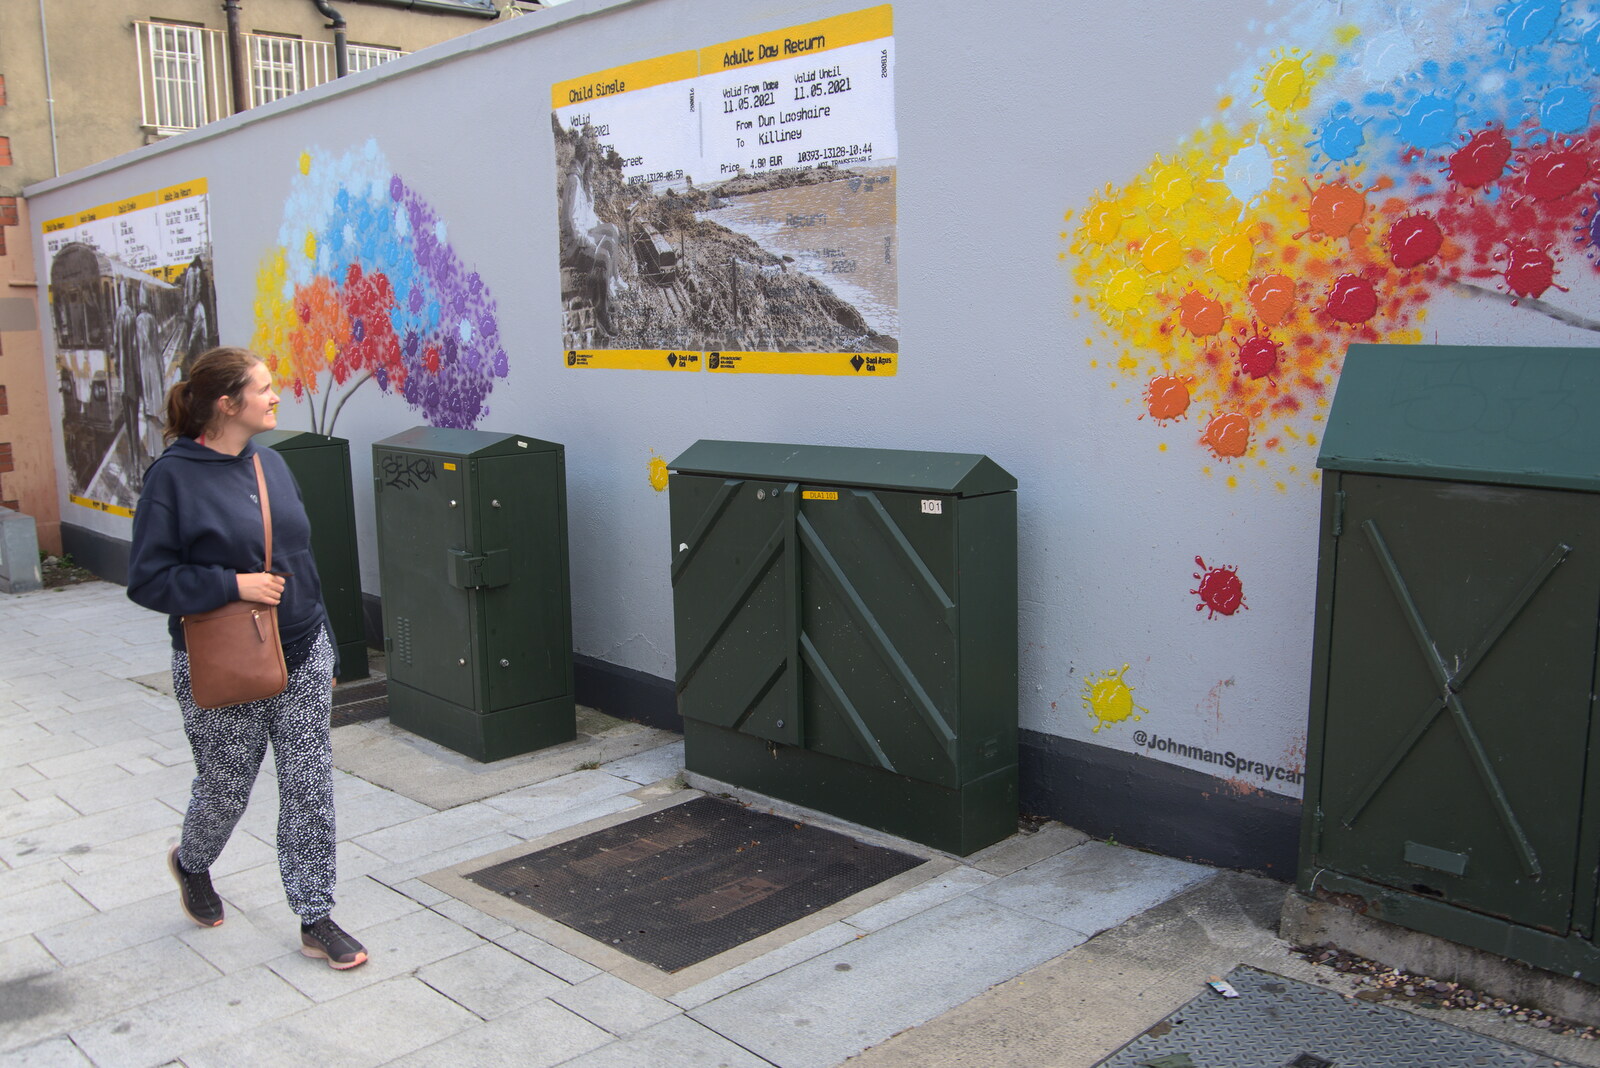 Cool pictures based on DART tickets from Manorhamilton and the Street Art of Dún Laoghaire, Ireland - 15th August 2021